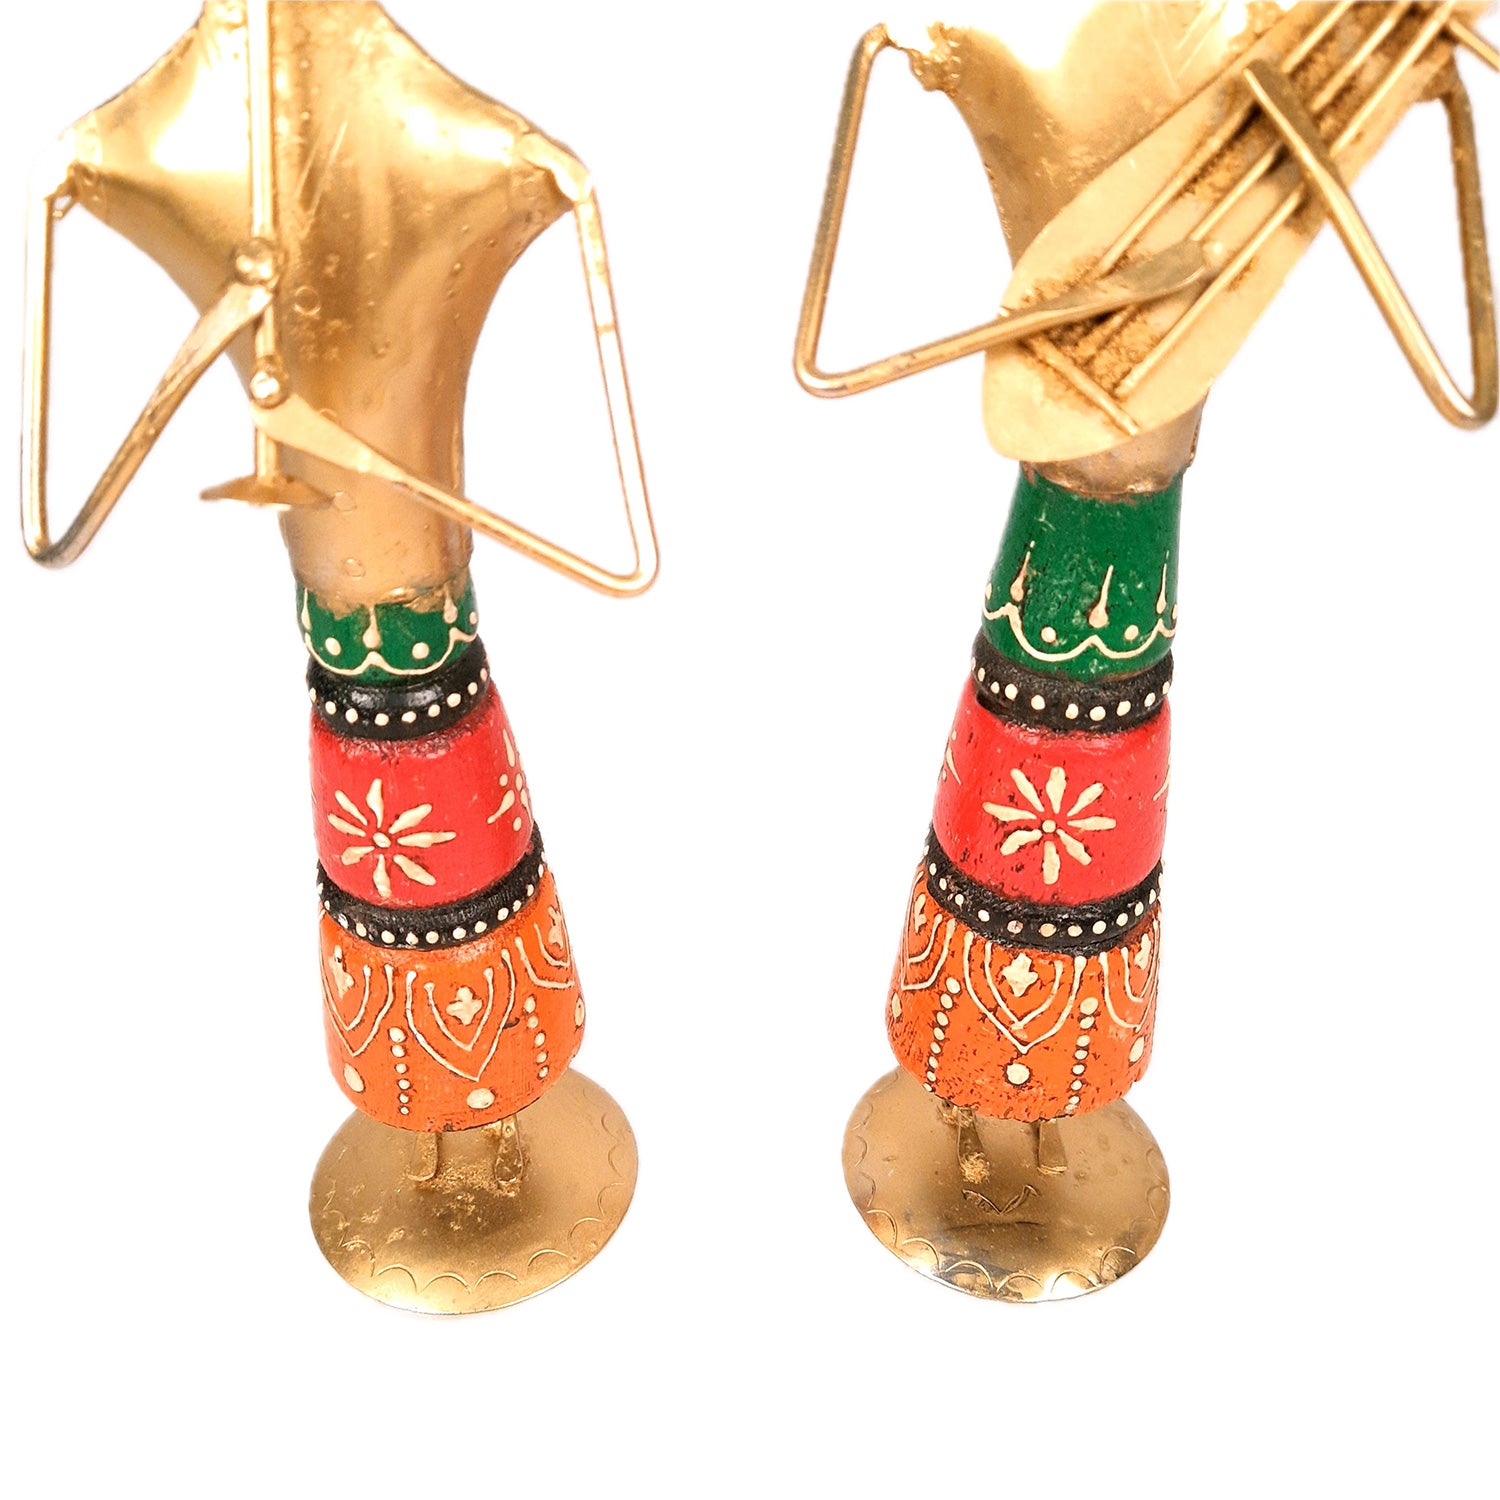 Tribal Musicians Figurines - for Home, Bedroom, Living Room, Office Desk, Table Decor & Gifts - 12 Inch (Set of 2)